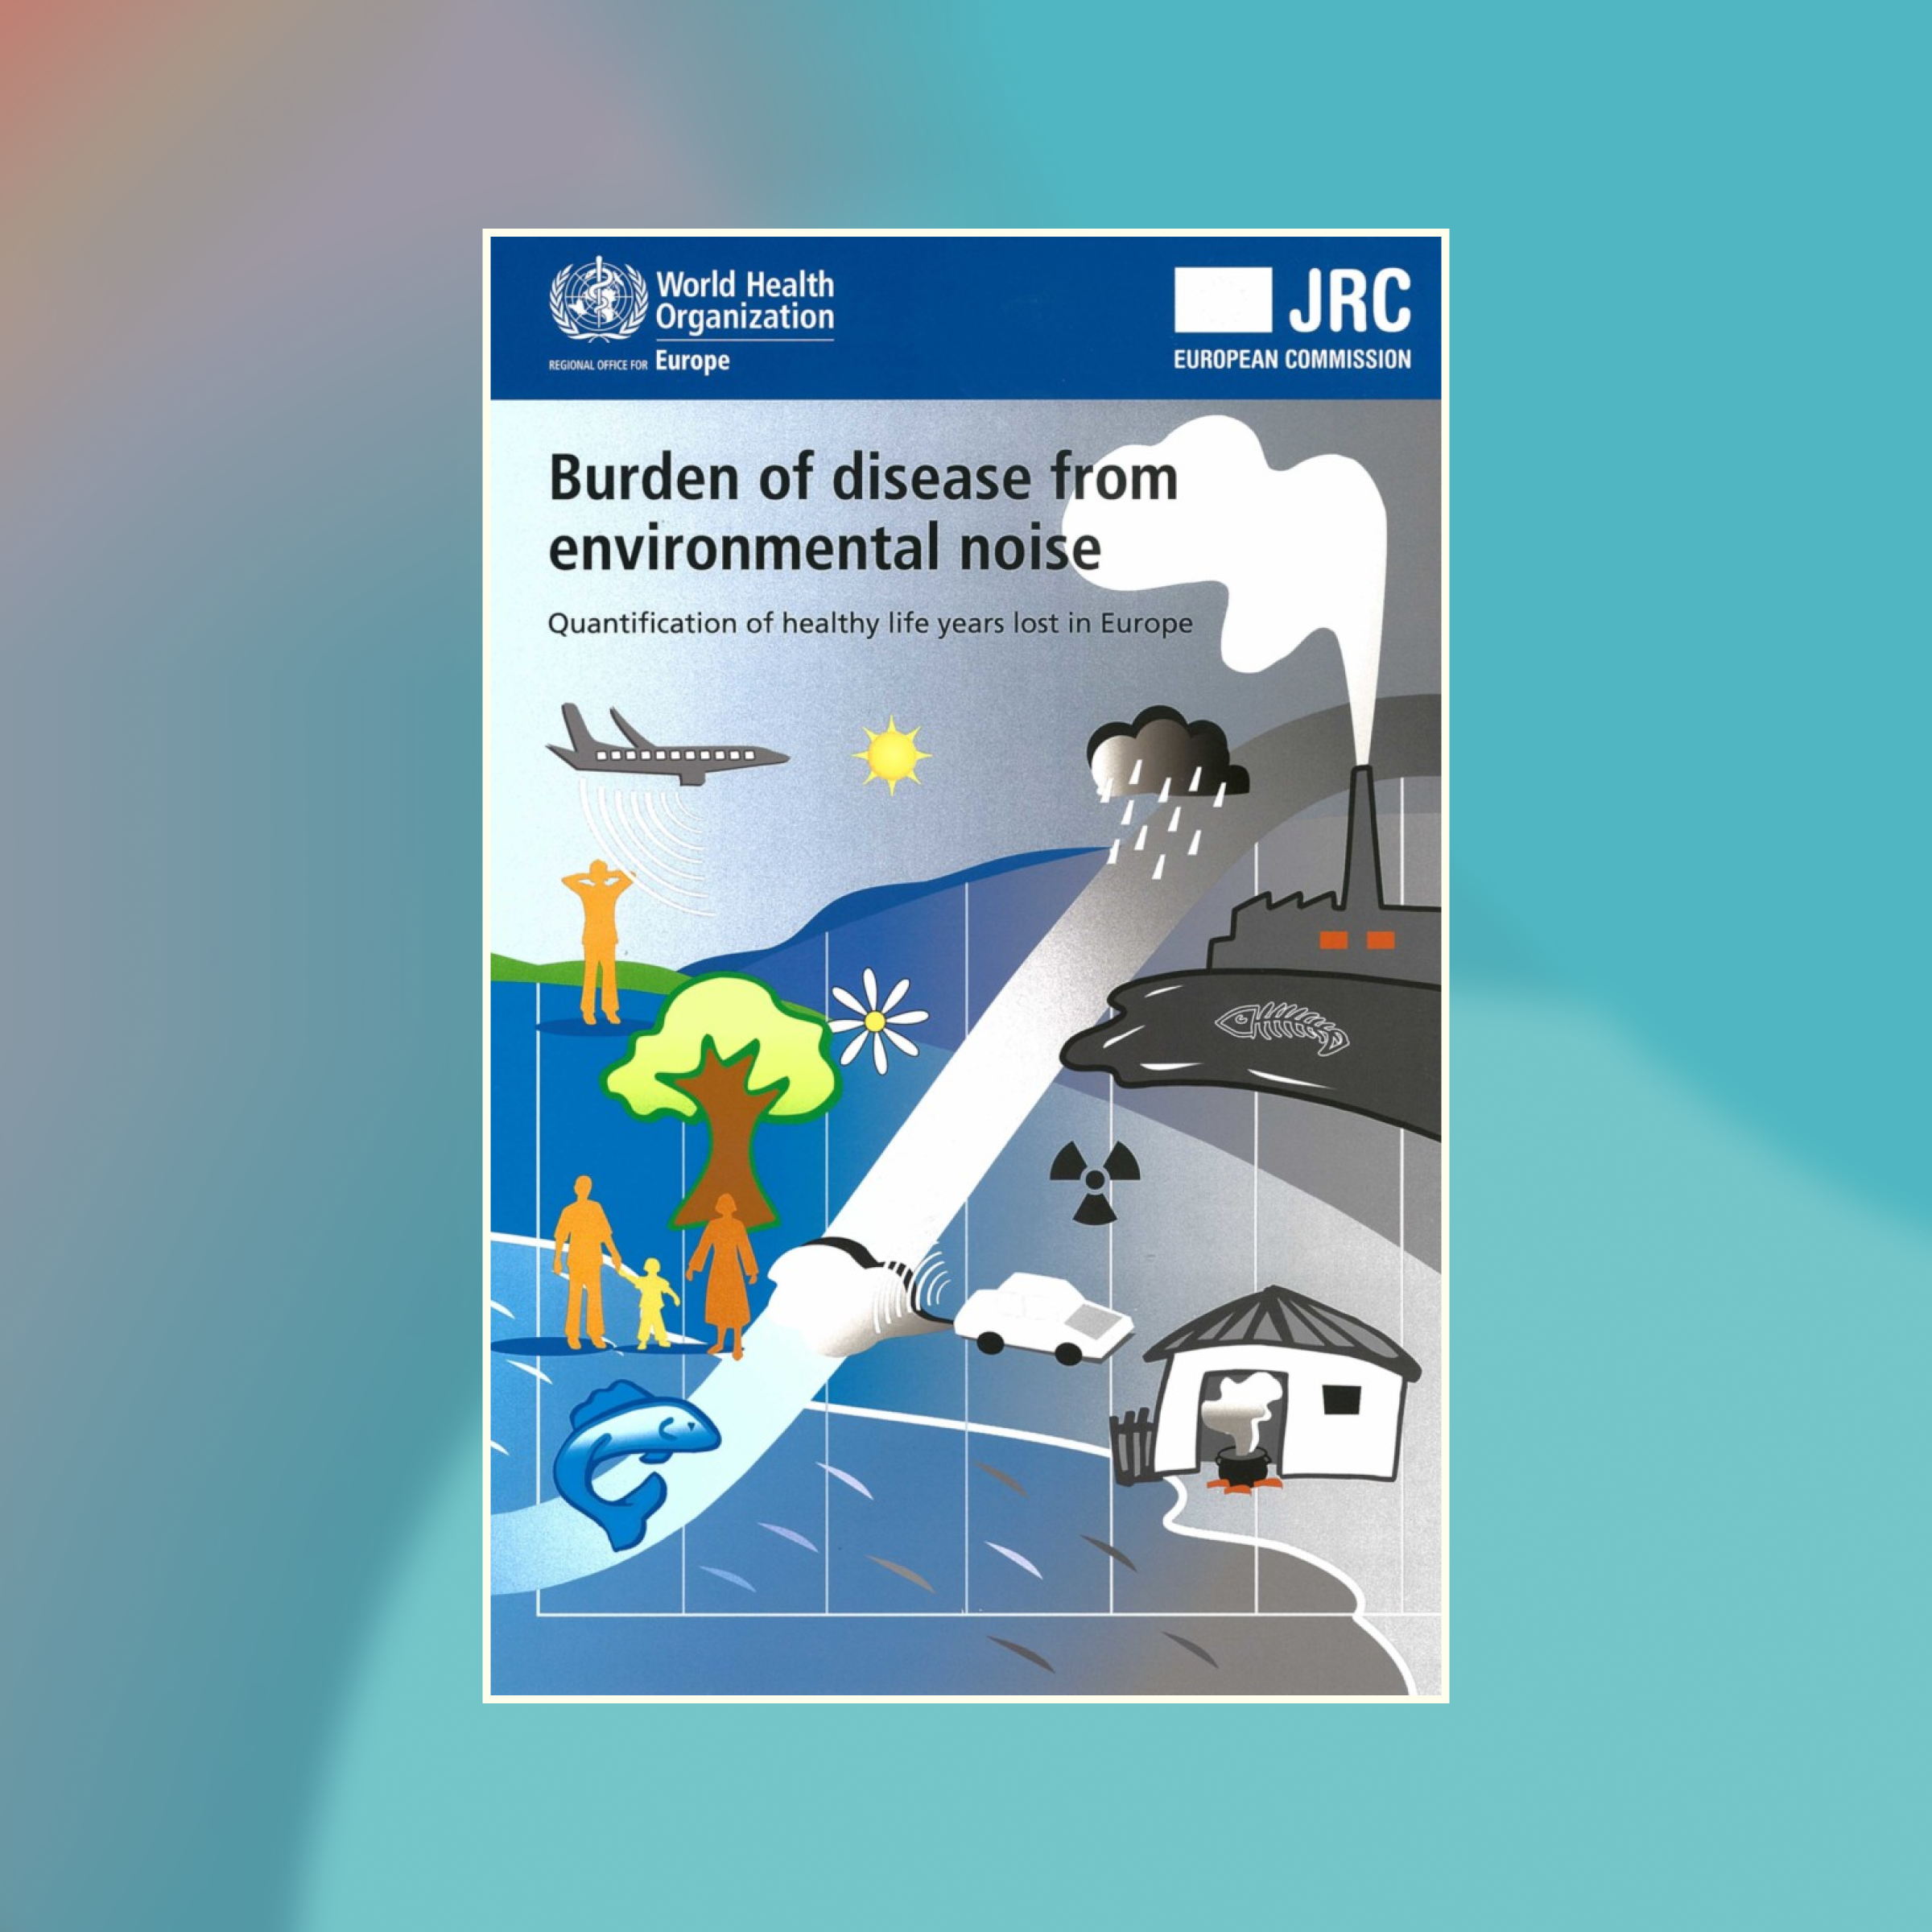 Book cover of Burden of disease from environmental noise against an abstract painted background